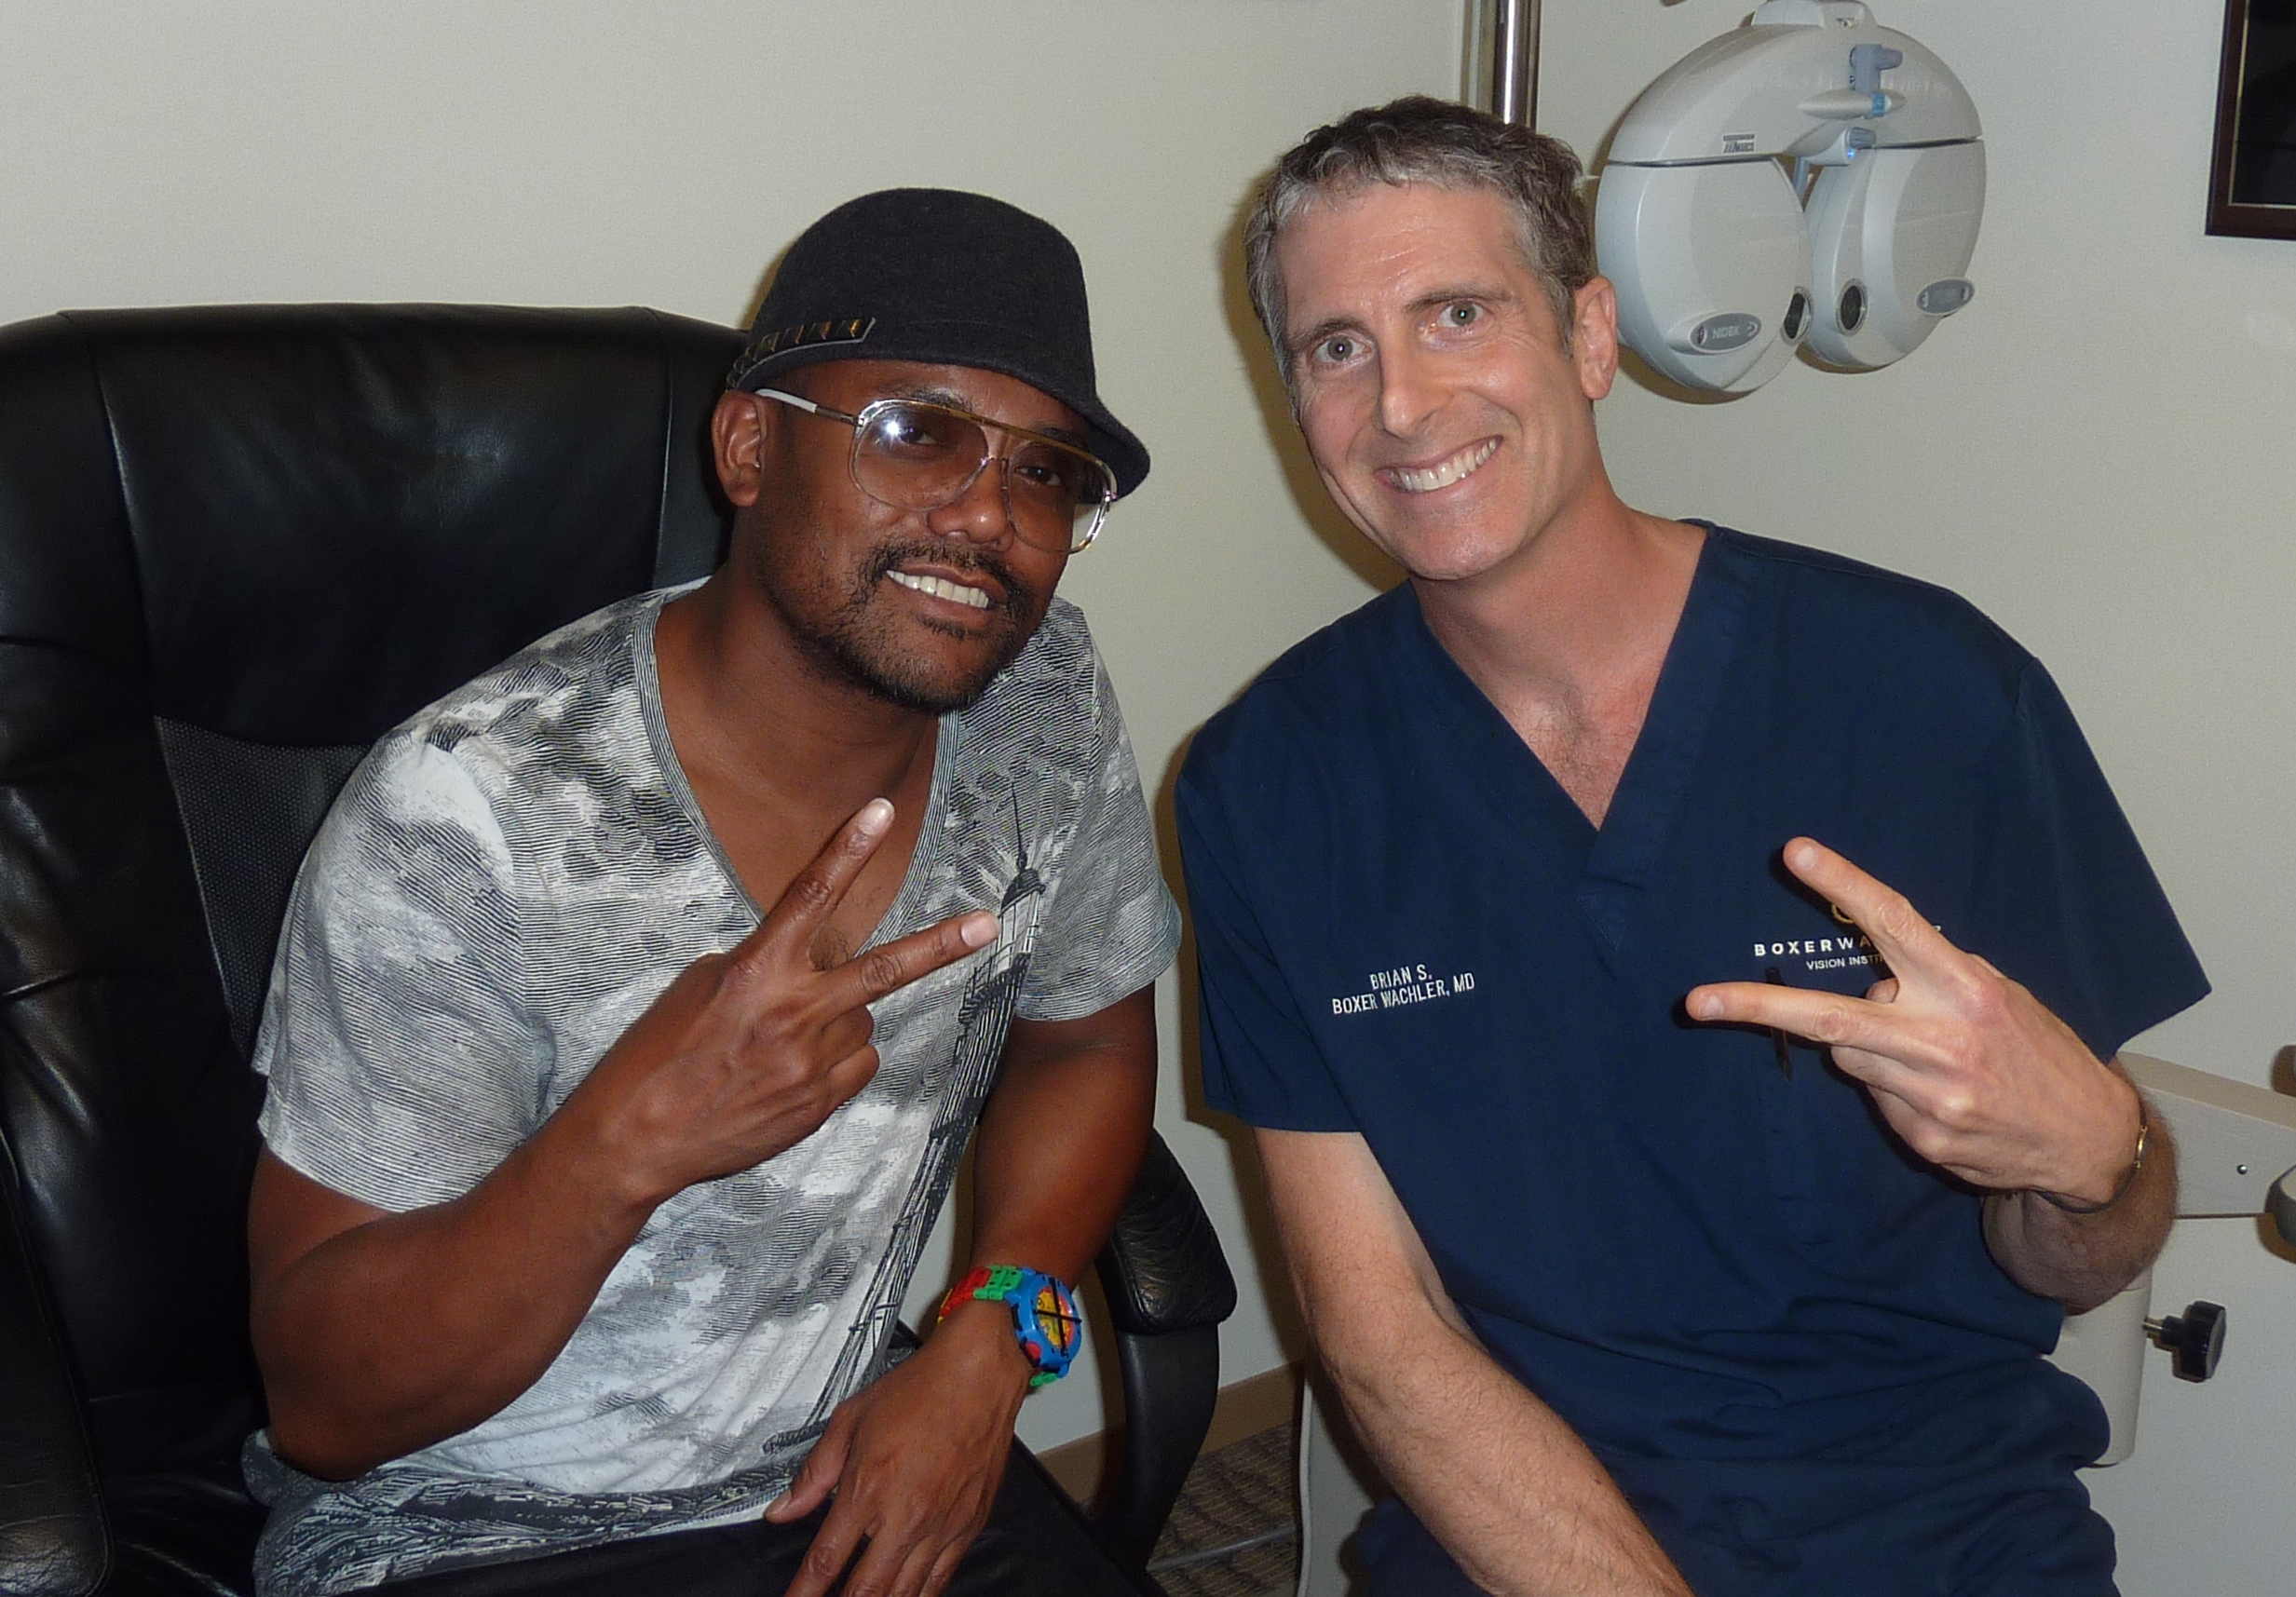 Dr. Brian Boxer Wachler and apl.de.ap, co-founder of the Black Eyed Peas, at his Beverly Hills practice